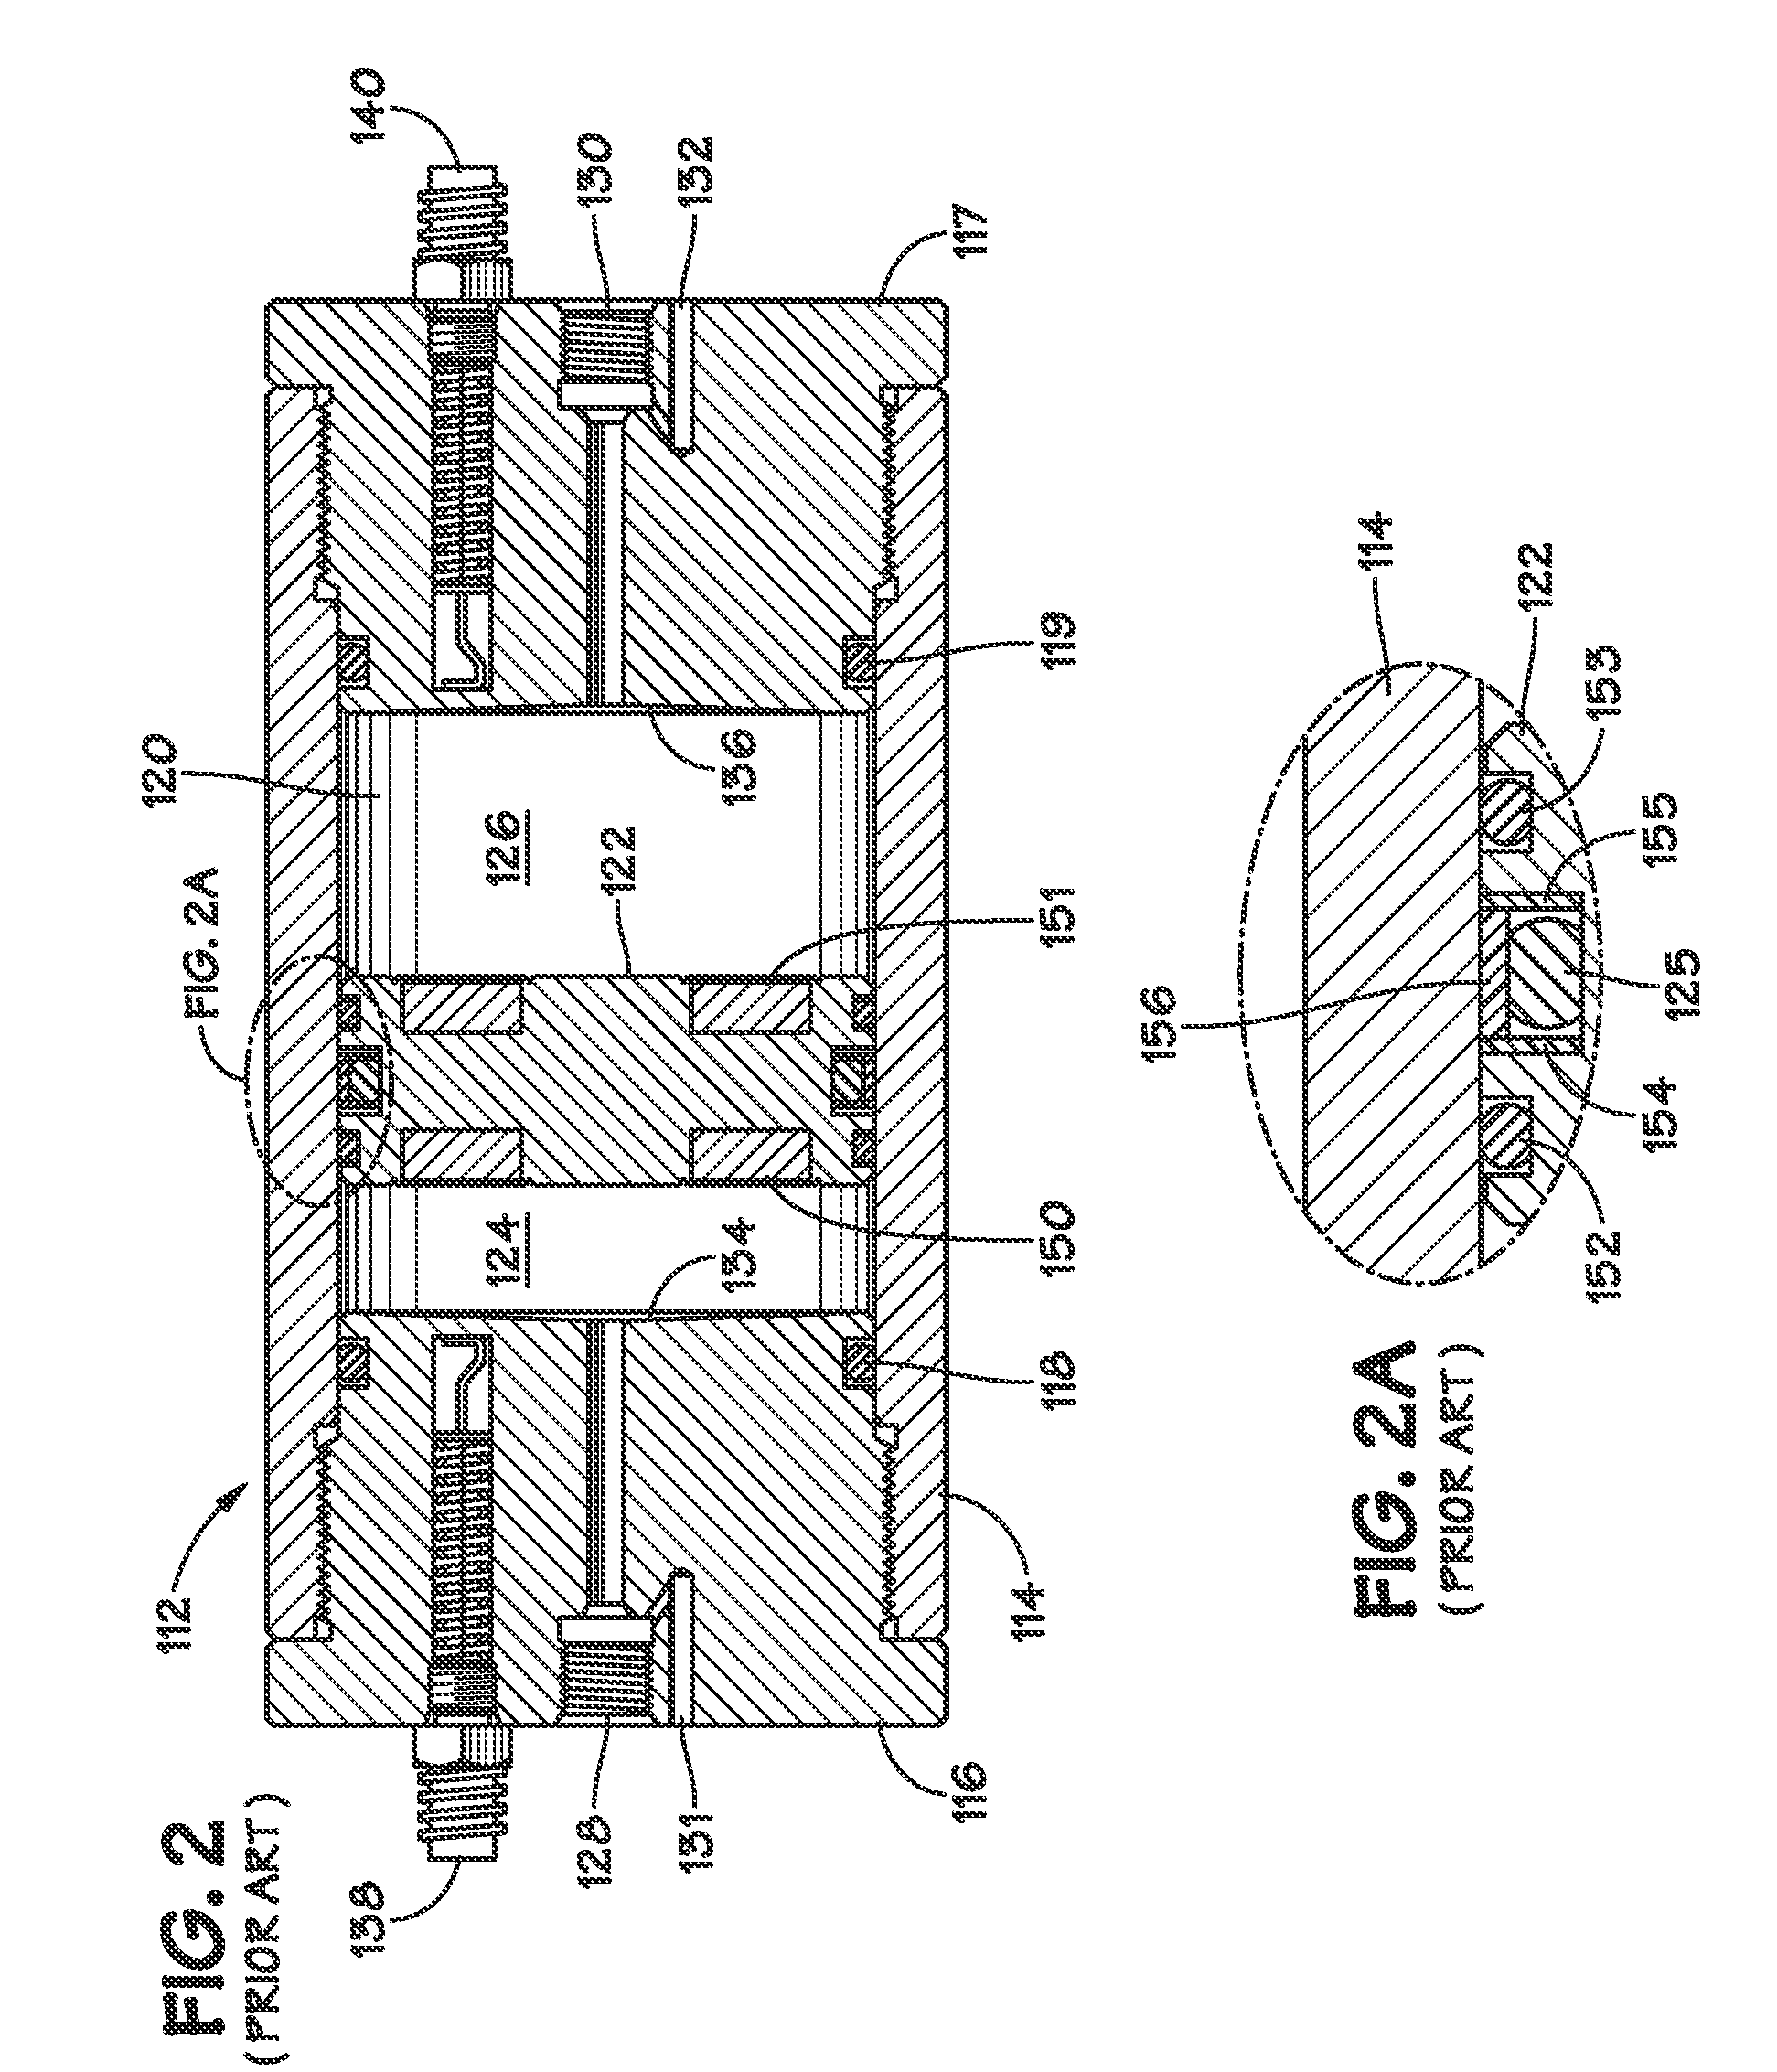 Fault-tolerant chemical injection system for oil and gas wells